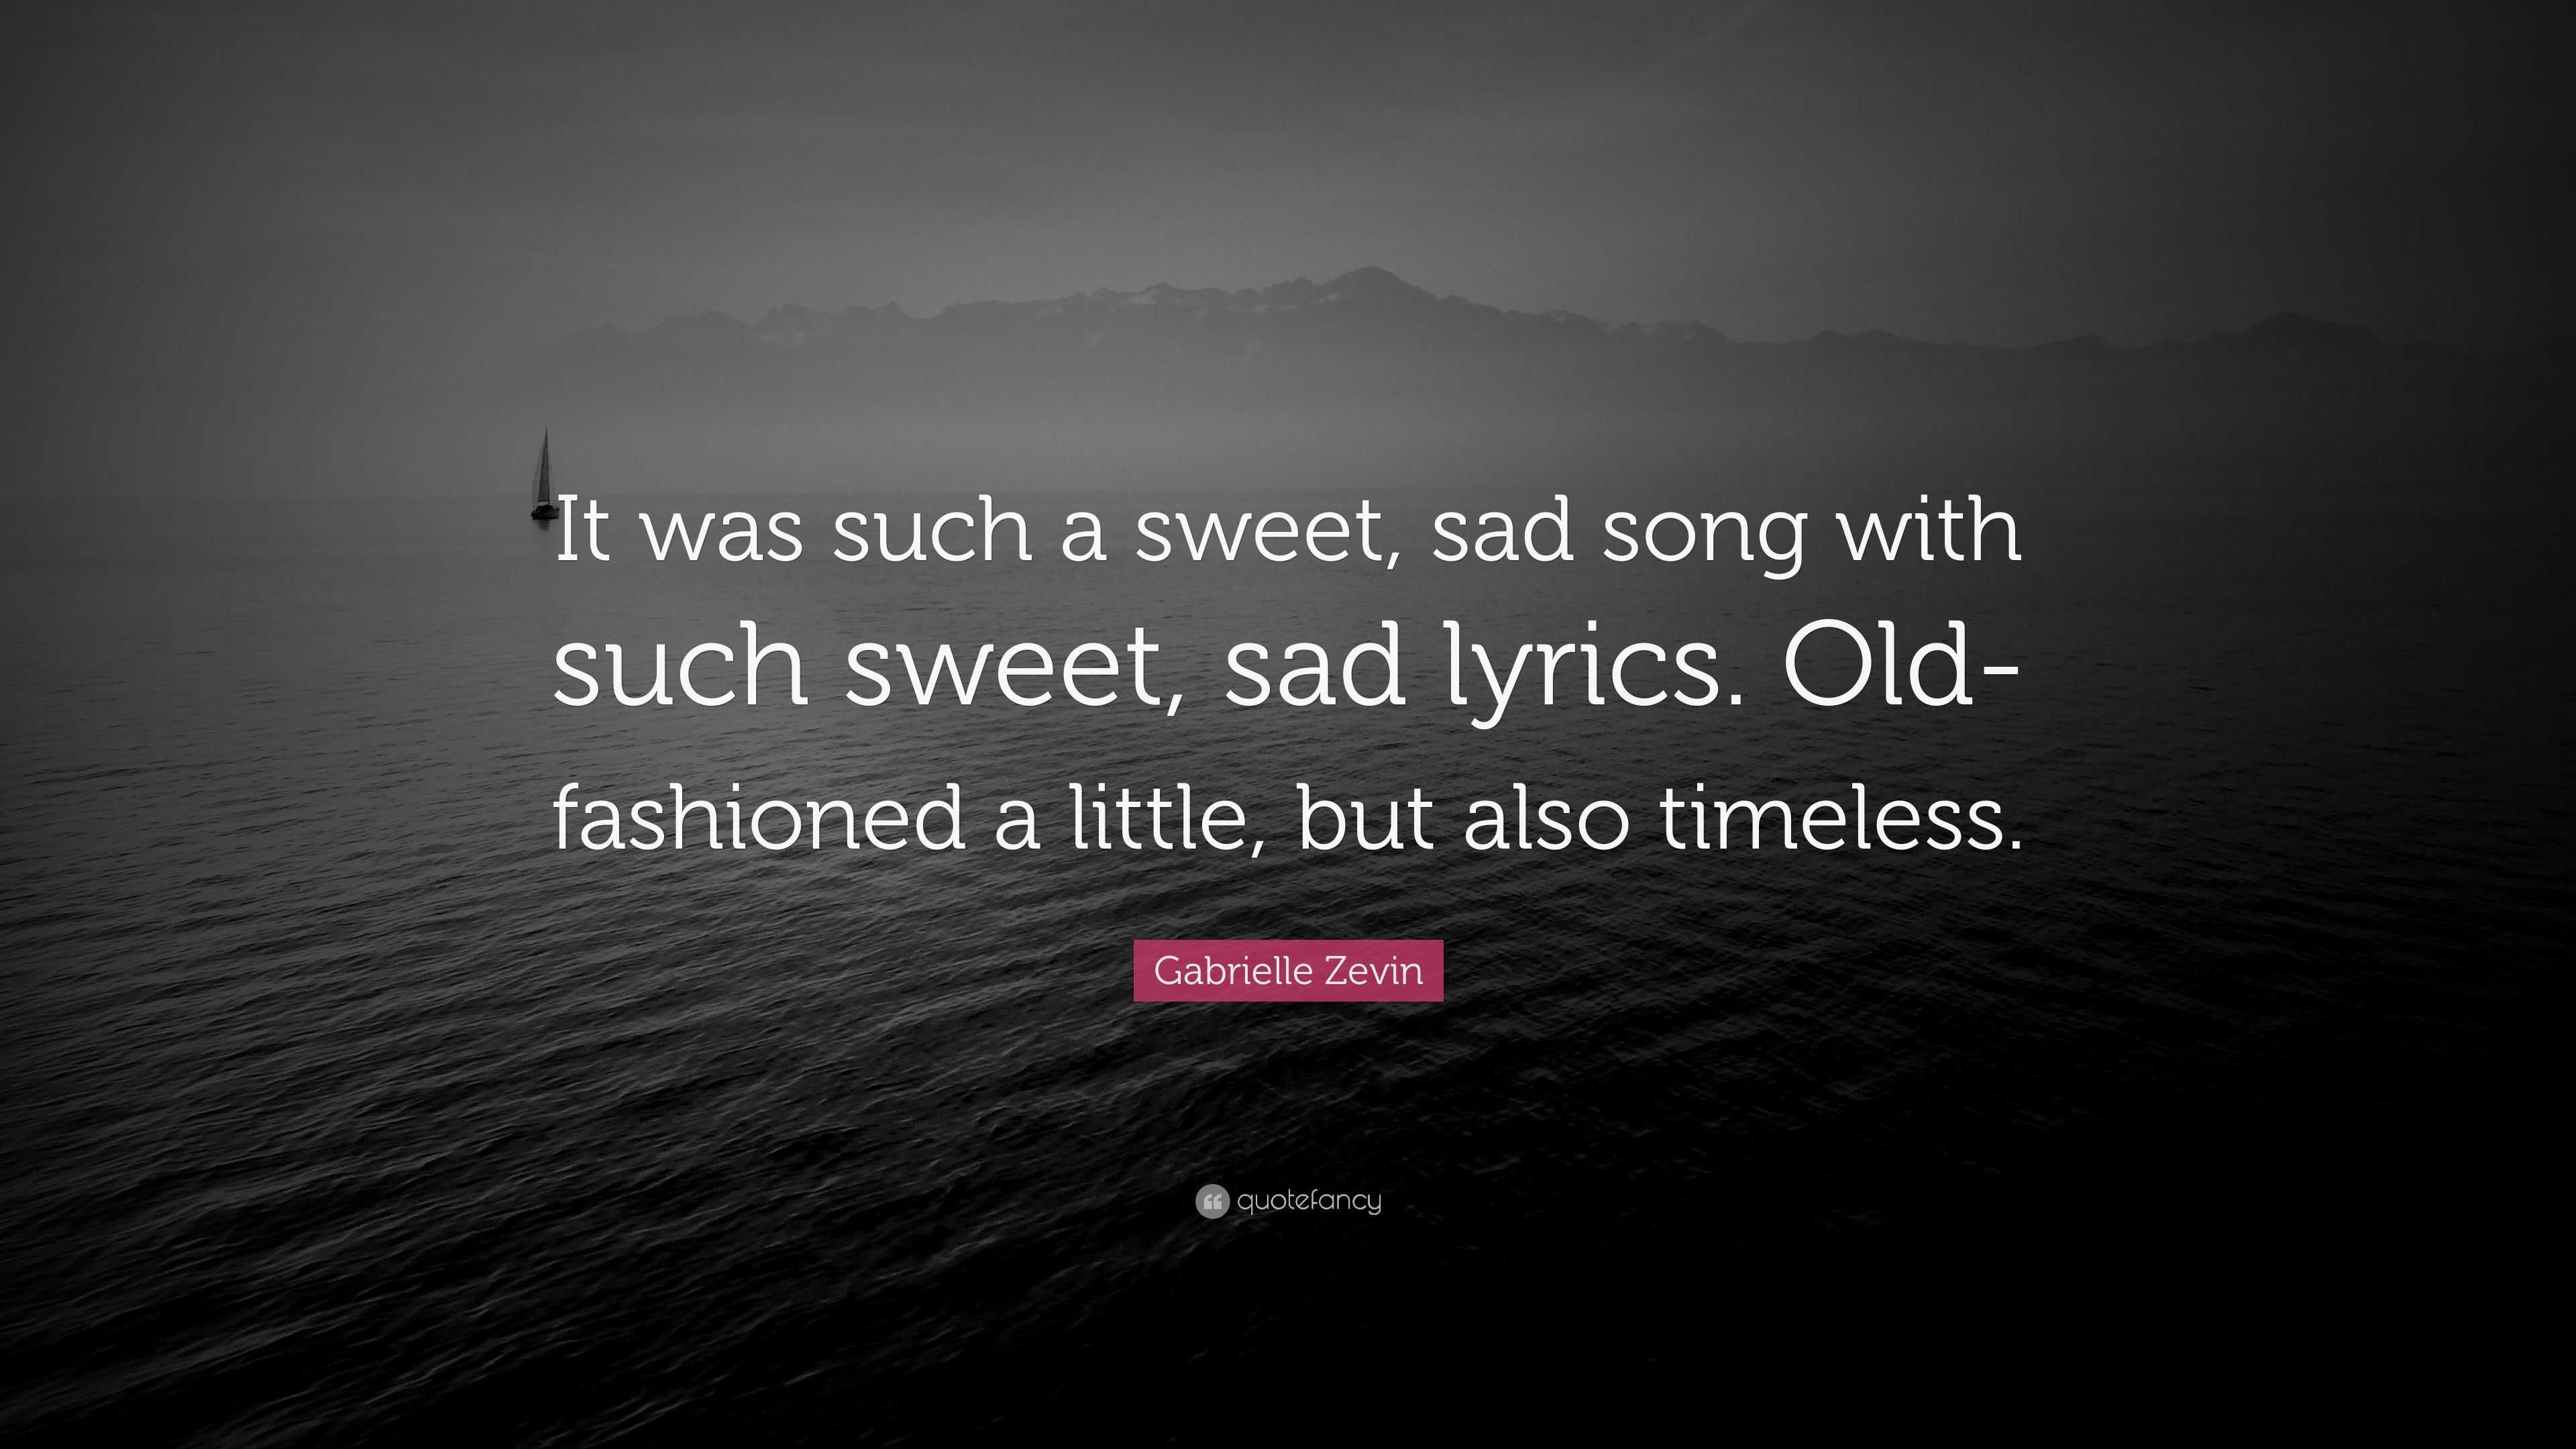 3840x2160 Gabrielle Zevin Quote 8220 It Was Such A Sweet Sad Song With Such Sweet Sad Lyrics Old Fashioned A Little But Also Timeless 8221 7 Wallpaper Quotefancy